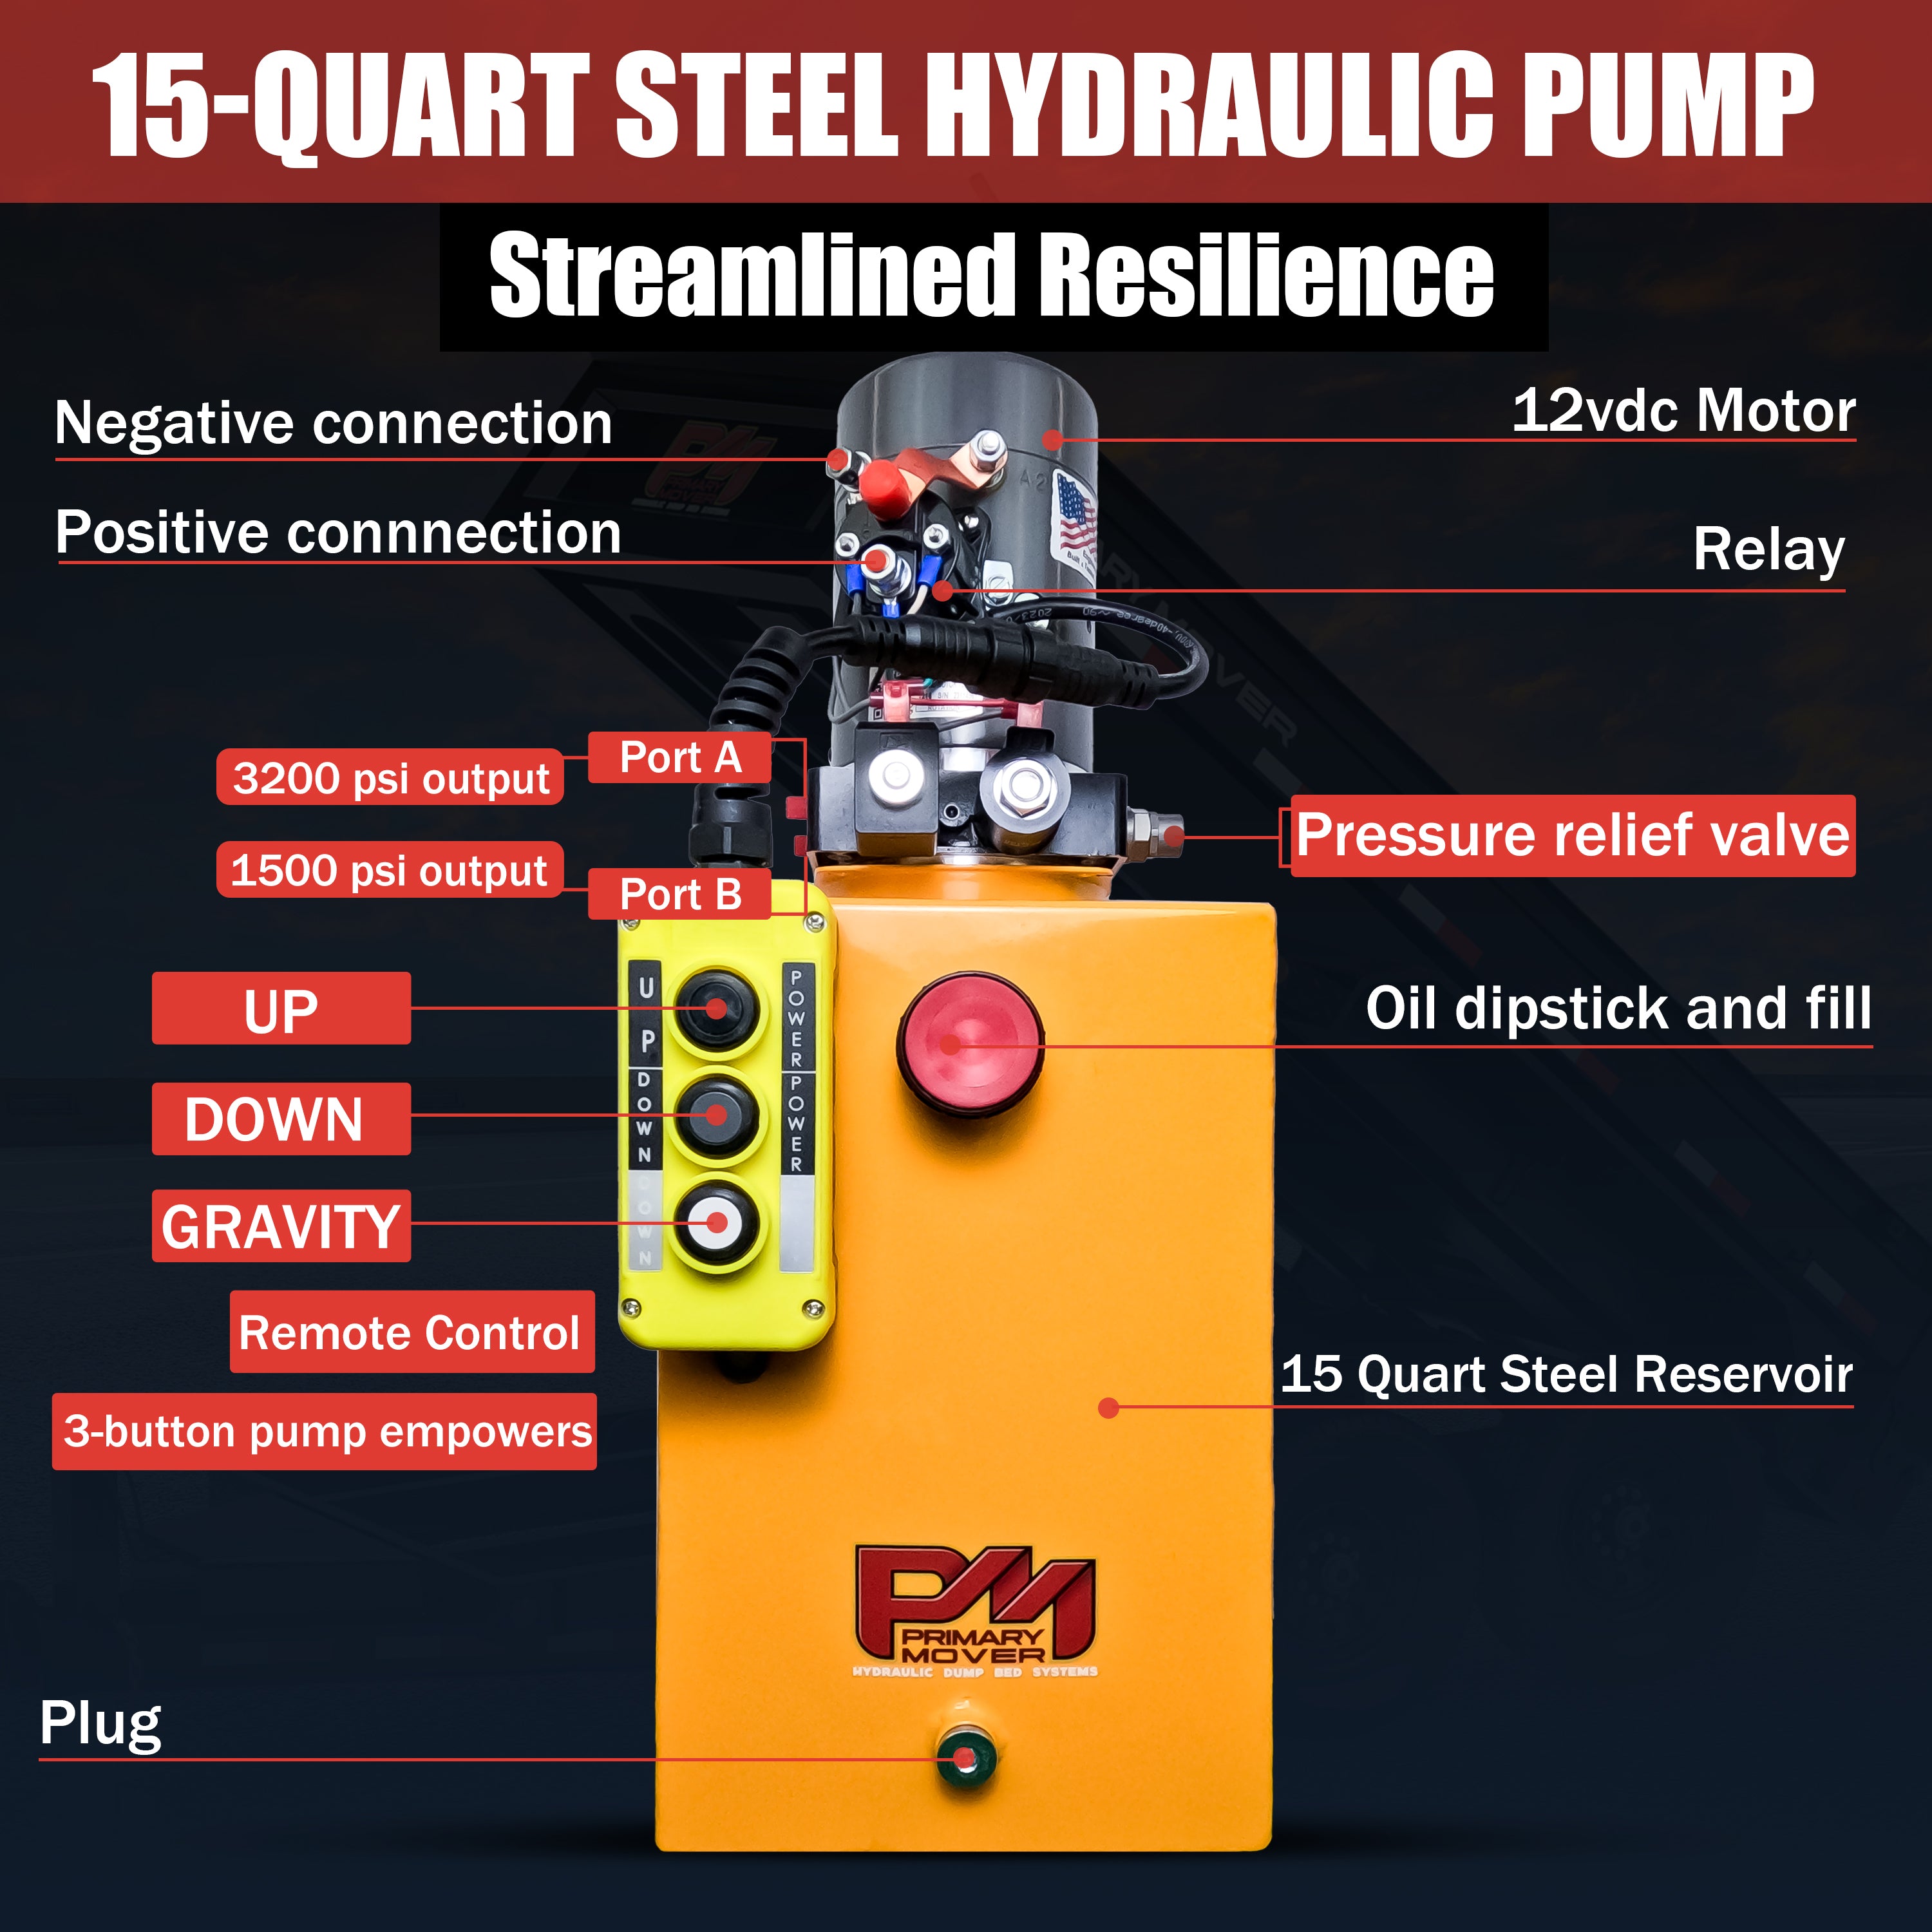 KTI 12V Double-Acting Hydraulic Pump - Steel Reservoir with red buttons and white text on a yellow control panel, ideal for hydraulic dump bed systems.